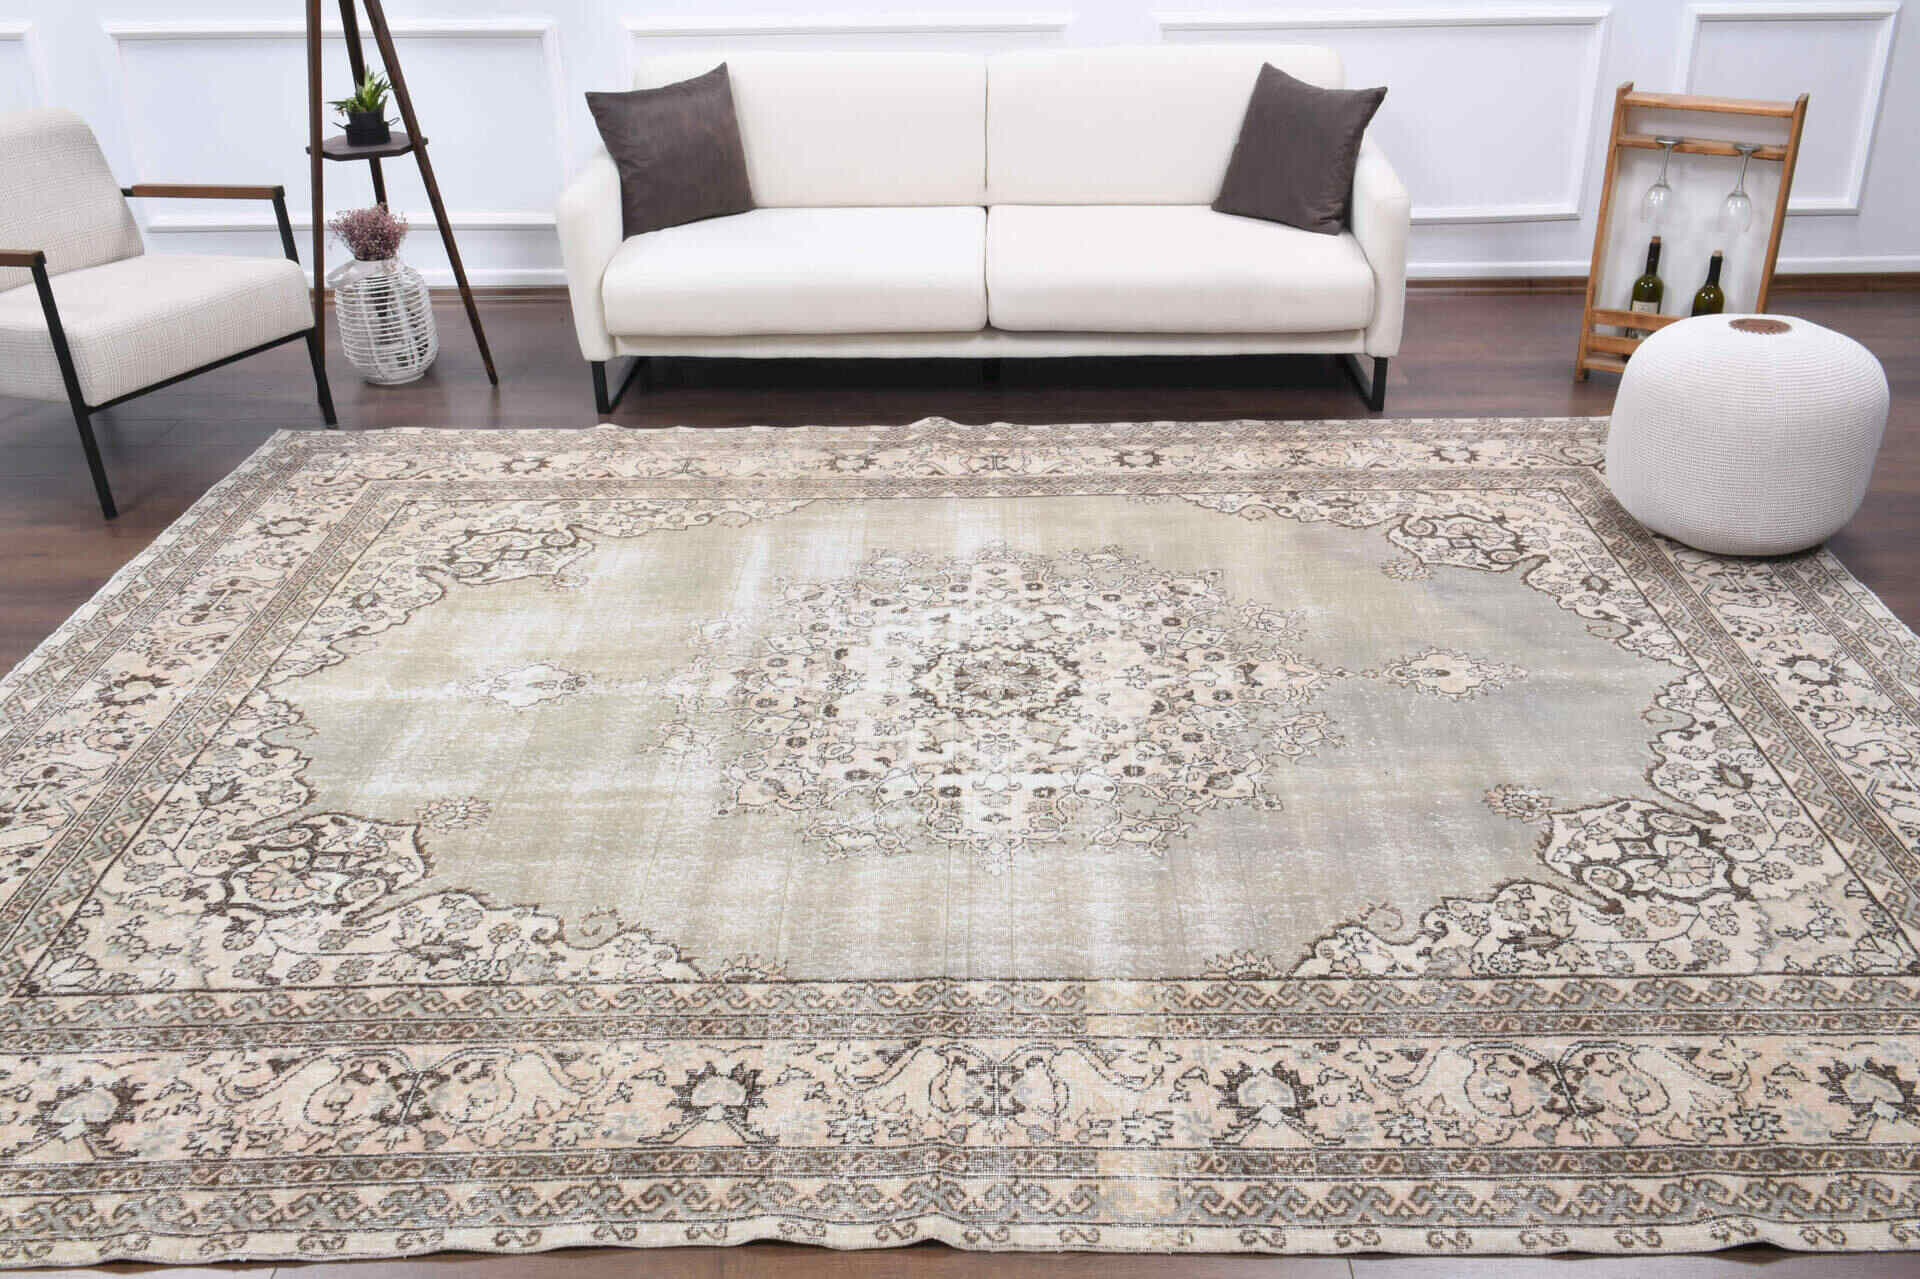 https://storables.com/wp-content/uploads/2023/10/15-best-large-area-rugs-for-2023-1697453863.jpg